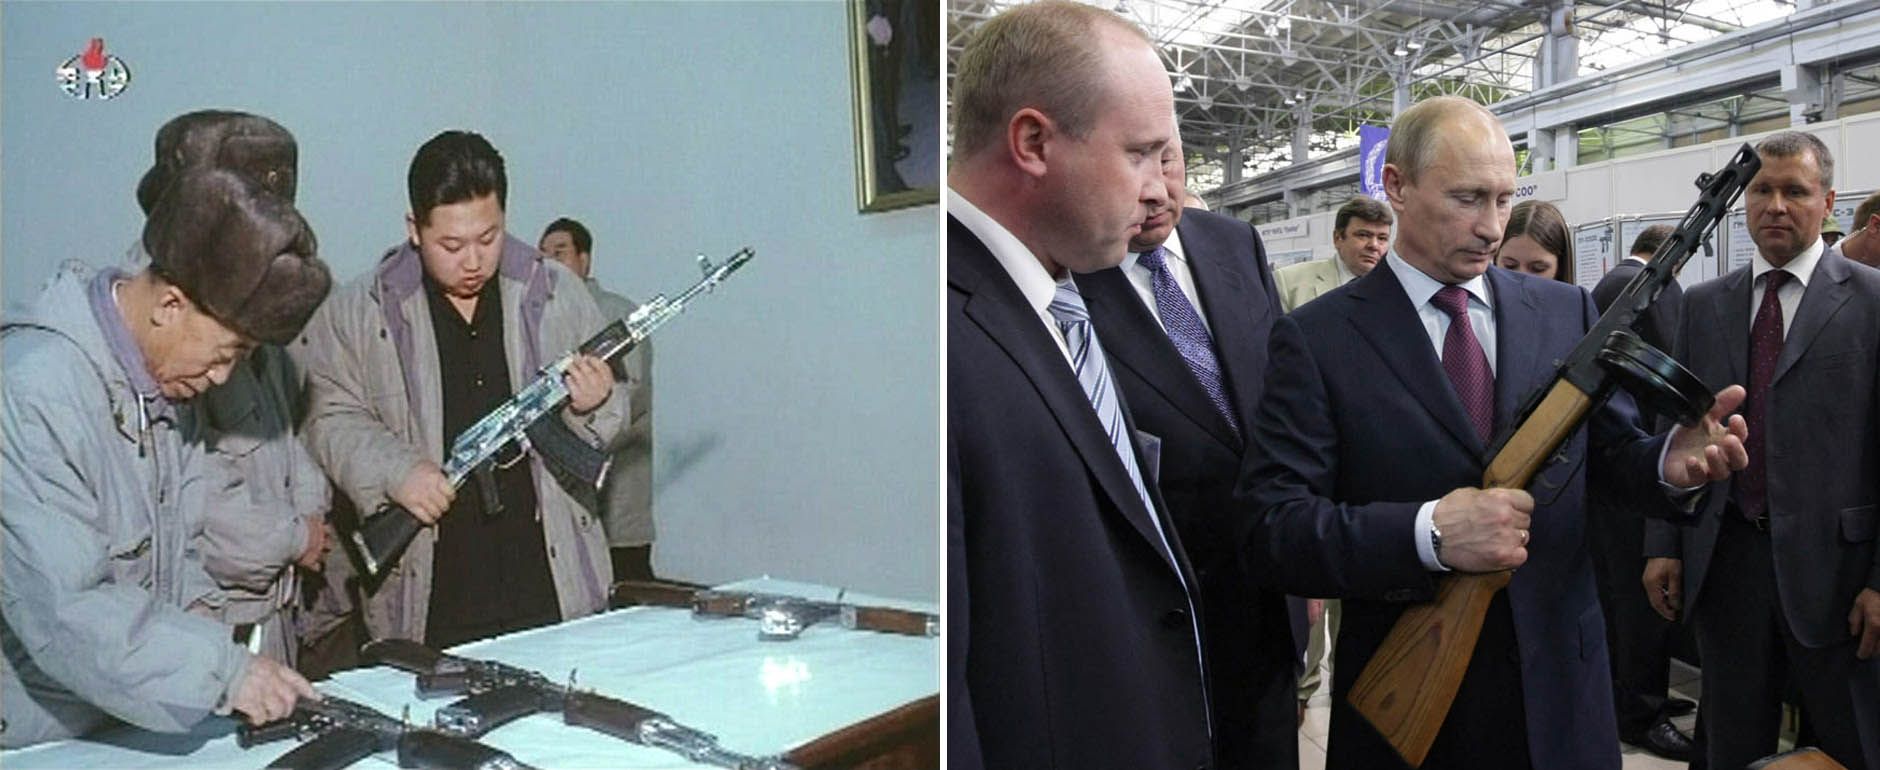 (L) New leader of North Korea Kim Jong-un inspects weapons in this undated still image taken from video at an unknown location in North Korea released by North Korean state TV KRT on January 8, 2012. (R) Russian Prime Minister Vladimir Putin (C) listens to explanations as he visits IZHMASH Izhevsk Mechanical Works, a weapons manufacturer, in Izhevsk on May 25, 2010.